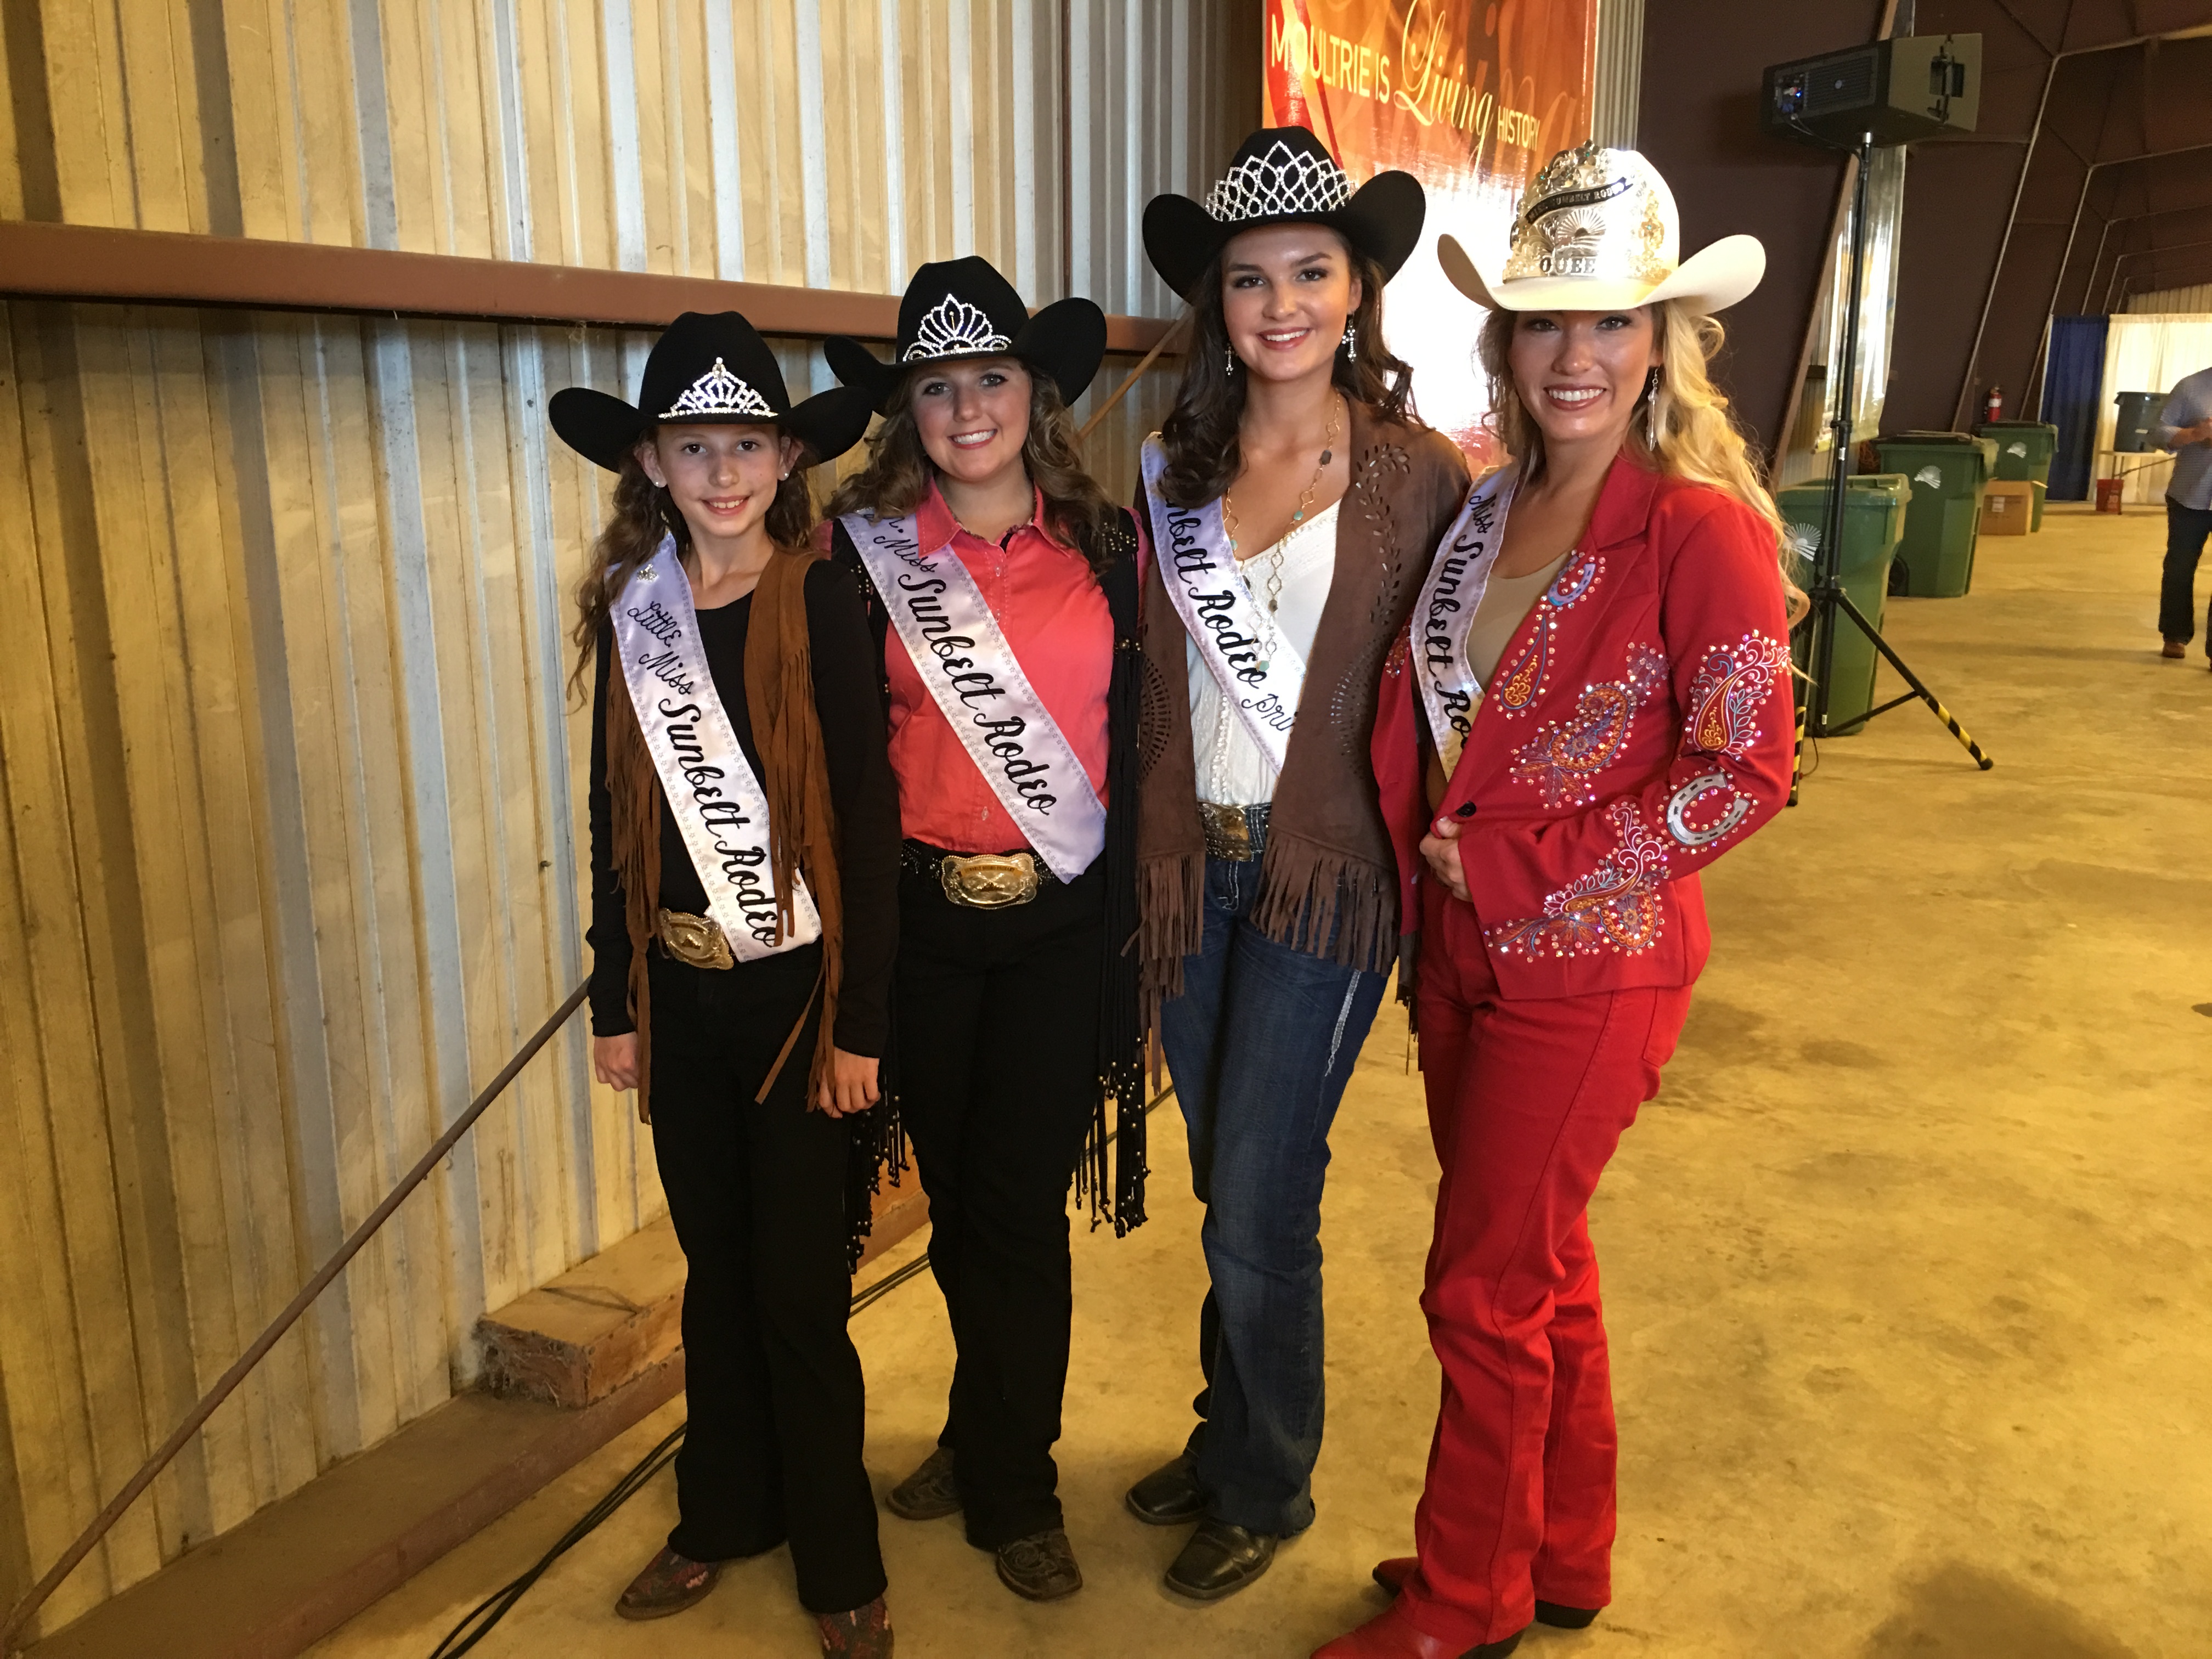 RANCH HORSE, TRICK RIDING, AND RODEO QUEENS